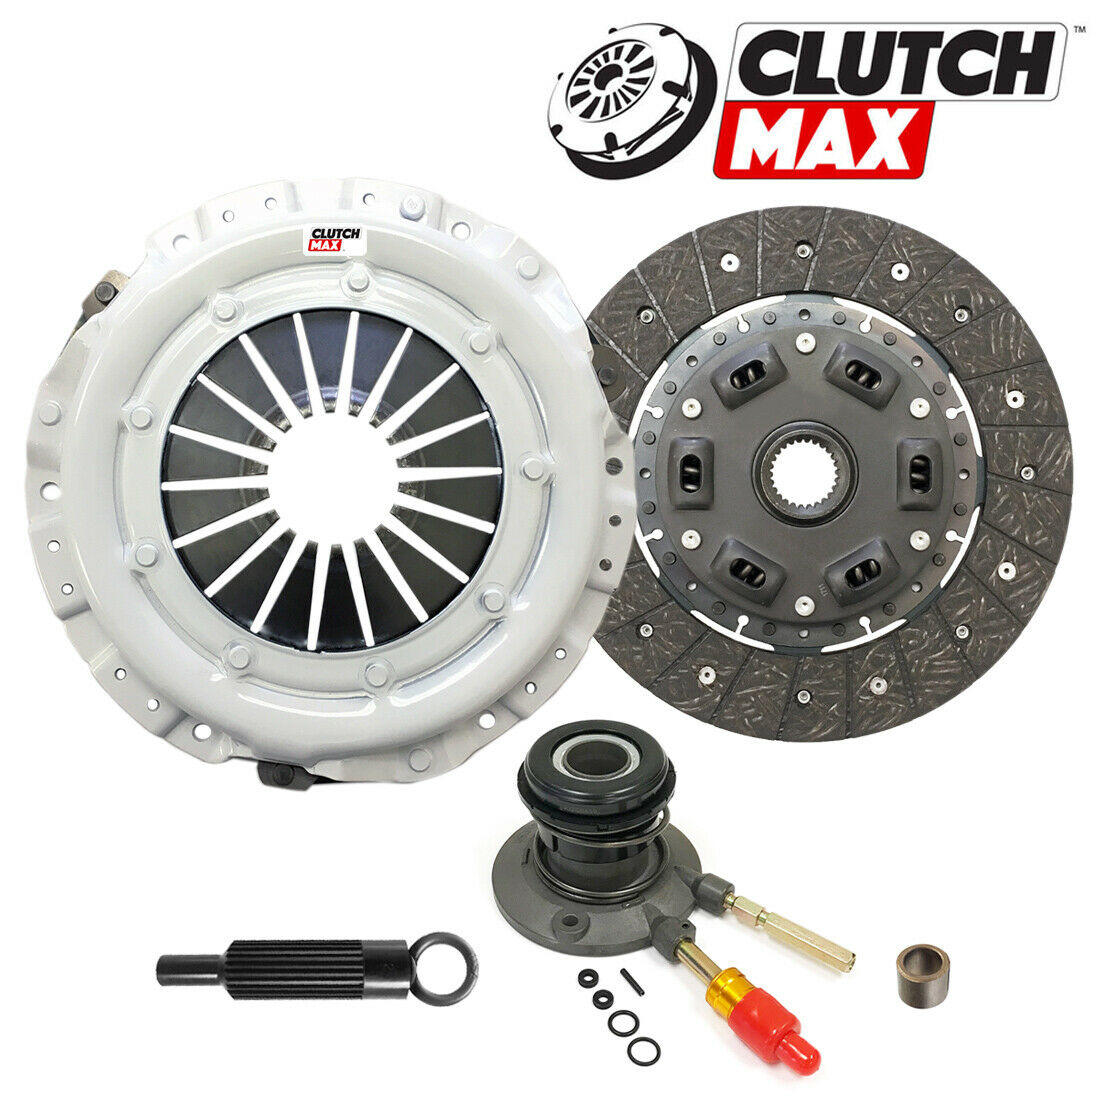 Oem Clutch Kit With Slave For 96-01 Chevy S10 Gmc Sonoma 96-00 Isuzu Hombre 2.2l